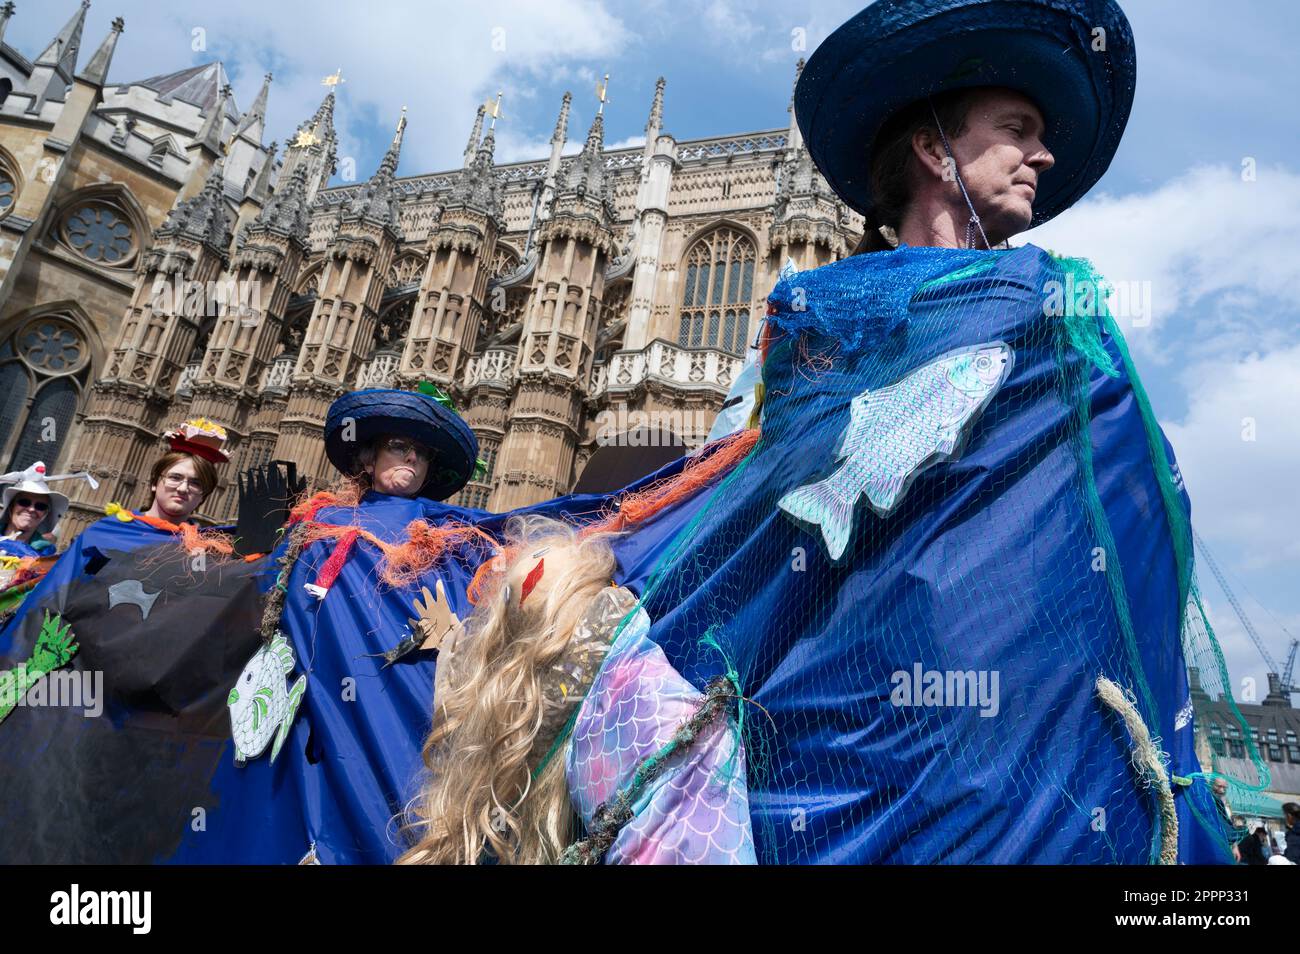 On April 22nd, Earth Day, activists from all over Britain met in Parliament Square to demand the government does more to deal with climate change. A g Stock Photo